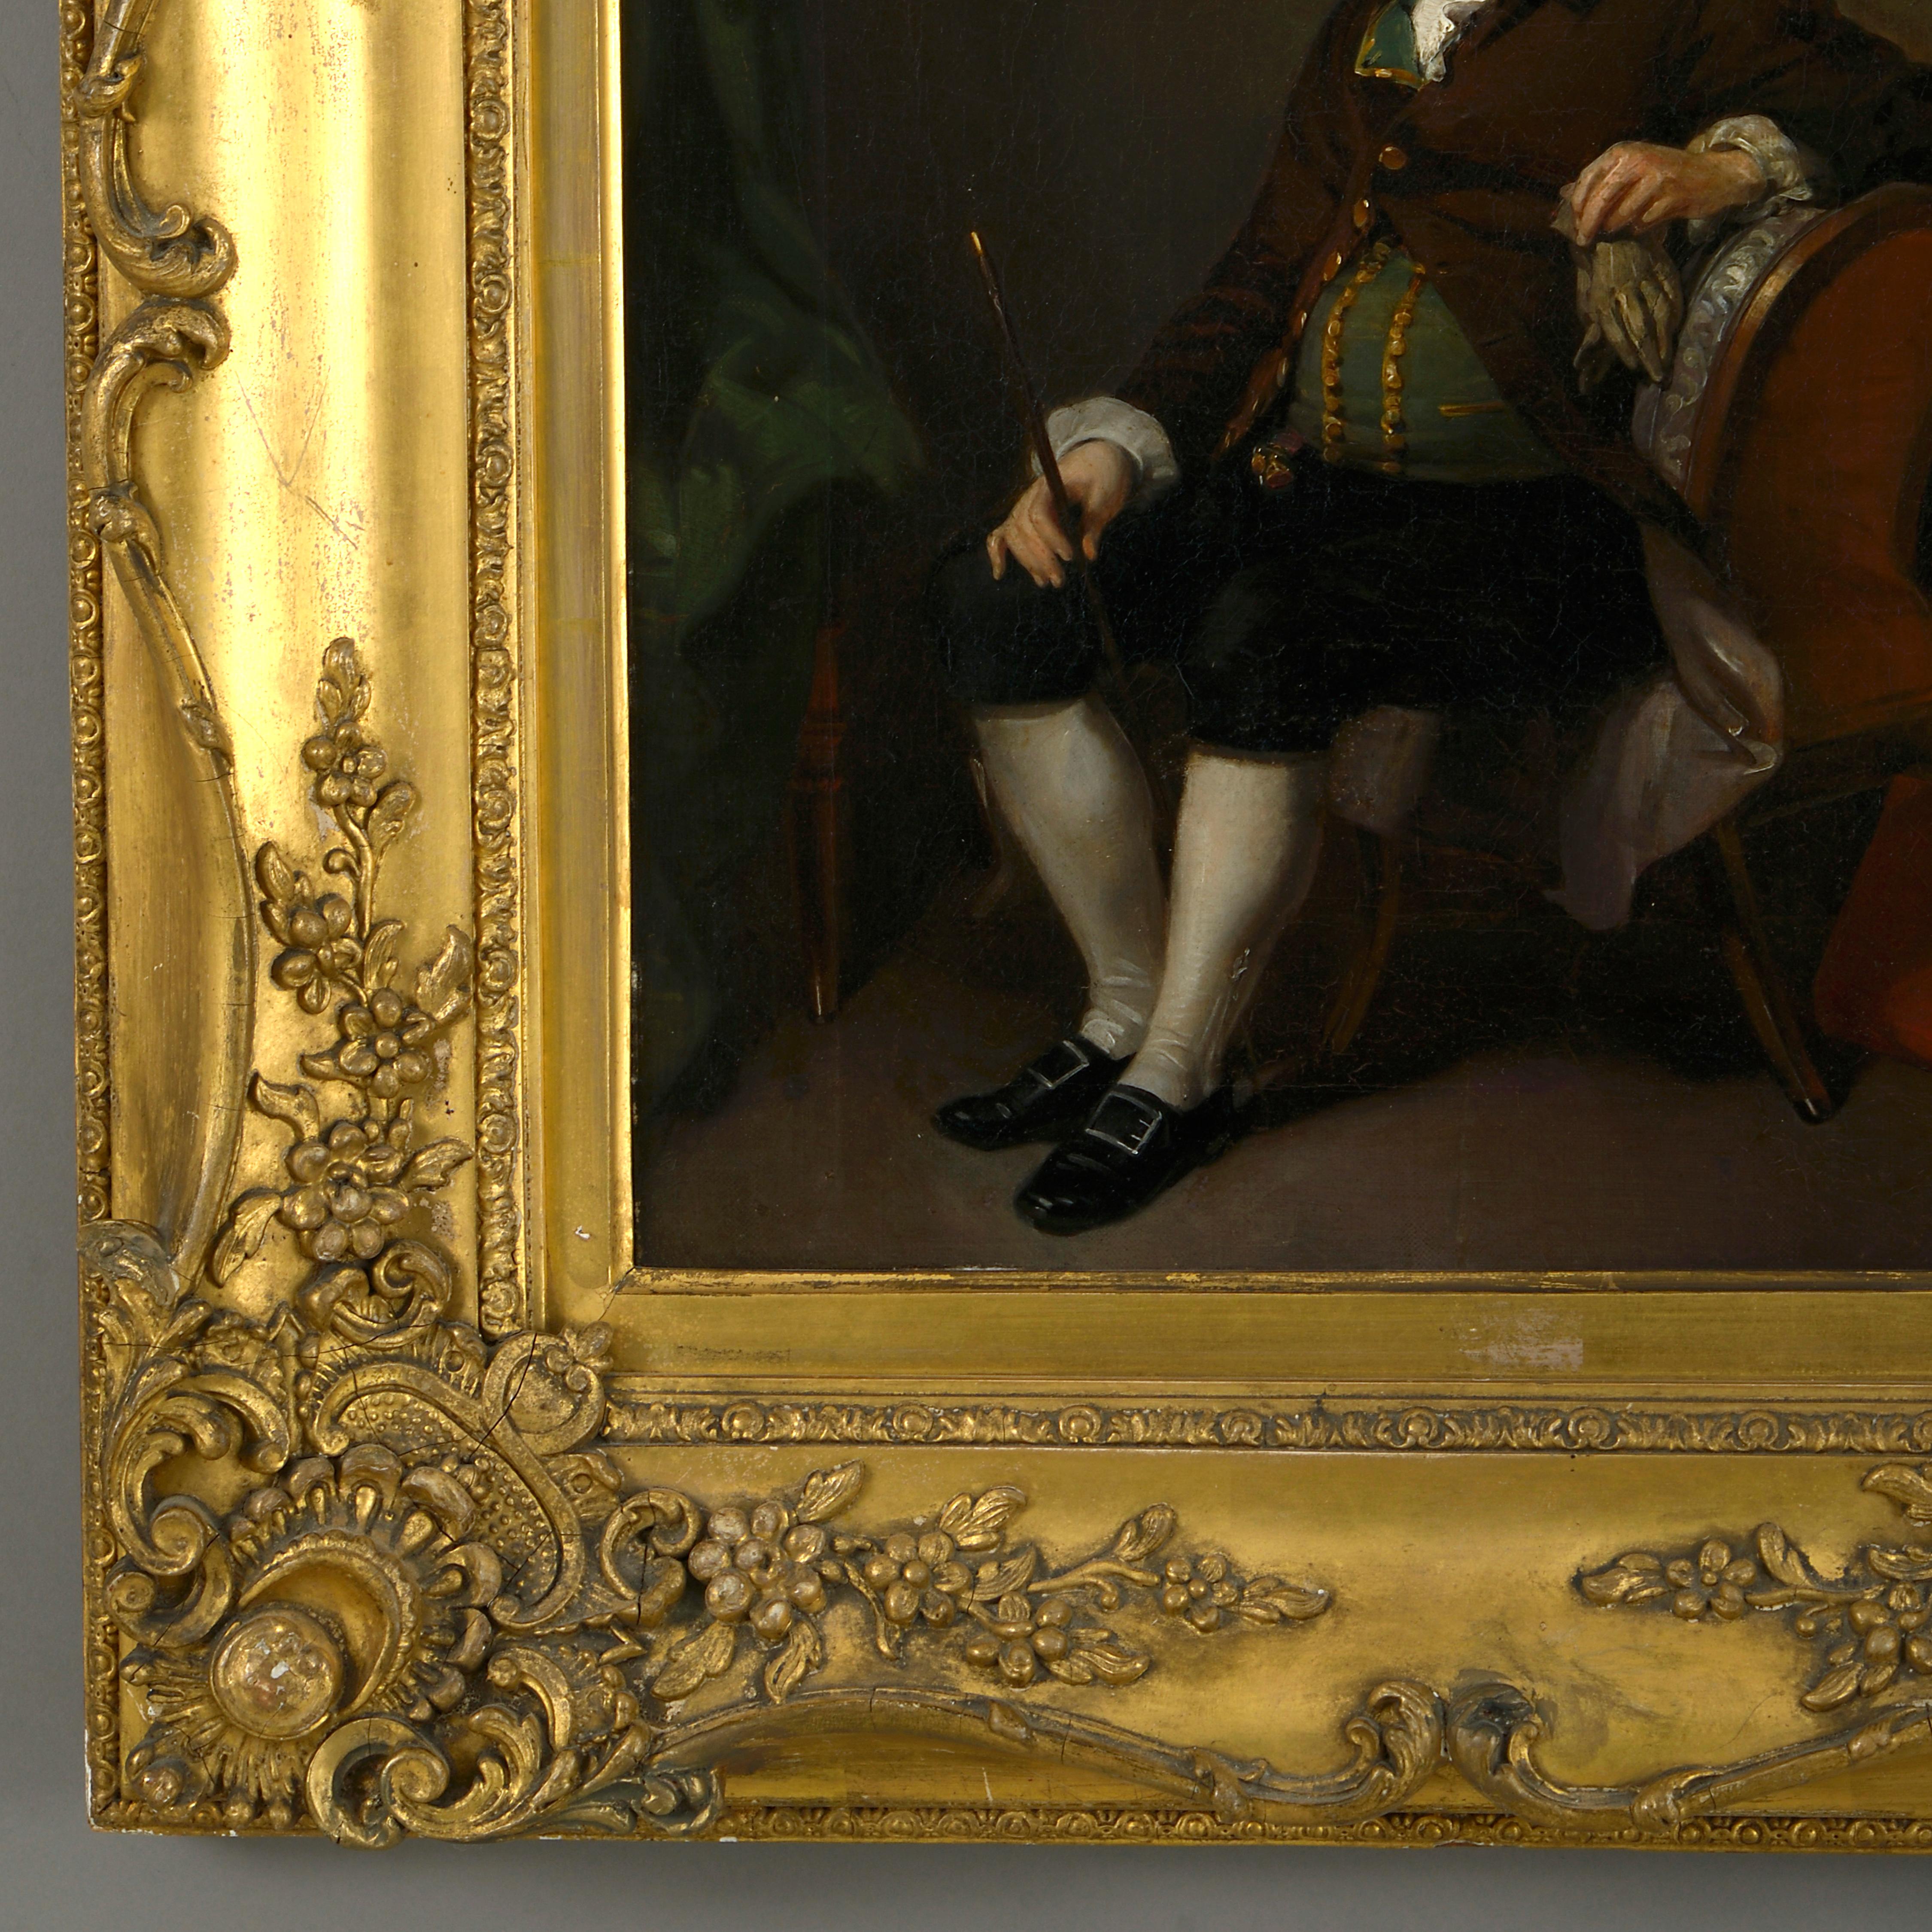 Follower of Samuel de Wilde c.1841
Portrait of an Actor in character.

Oil on canvas; held in a period gilded frame.

Dimensions refer to size of frame.

Provenance: Private Collection, England

Samuel De Wilde (1752-1832) studied at the Royal